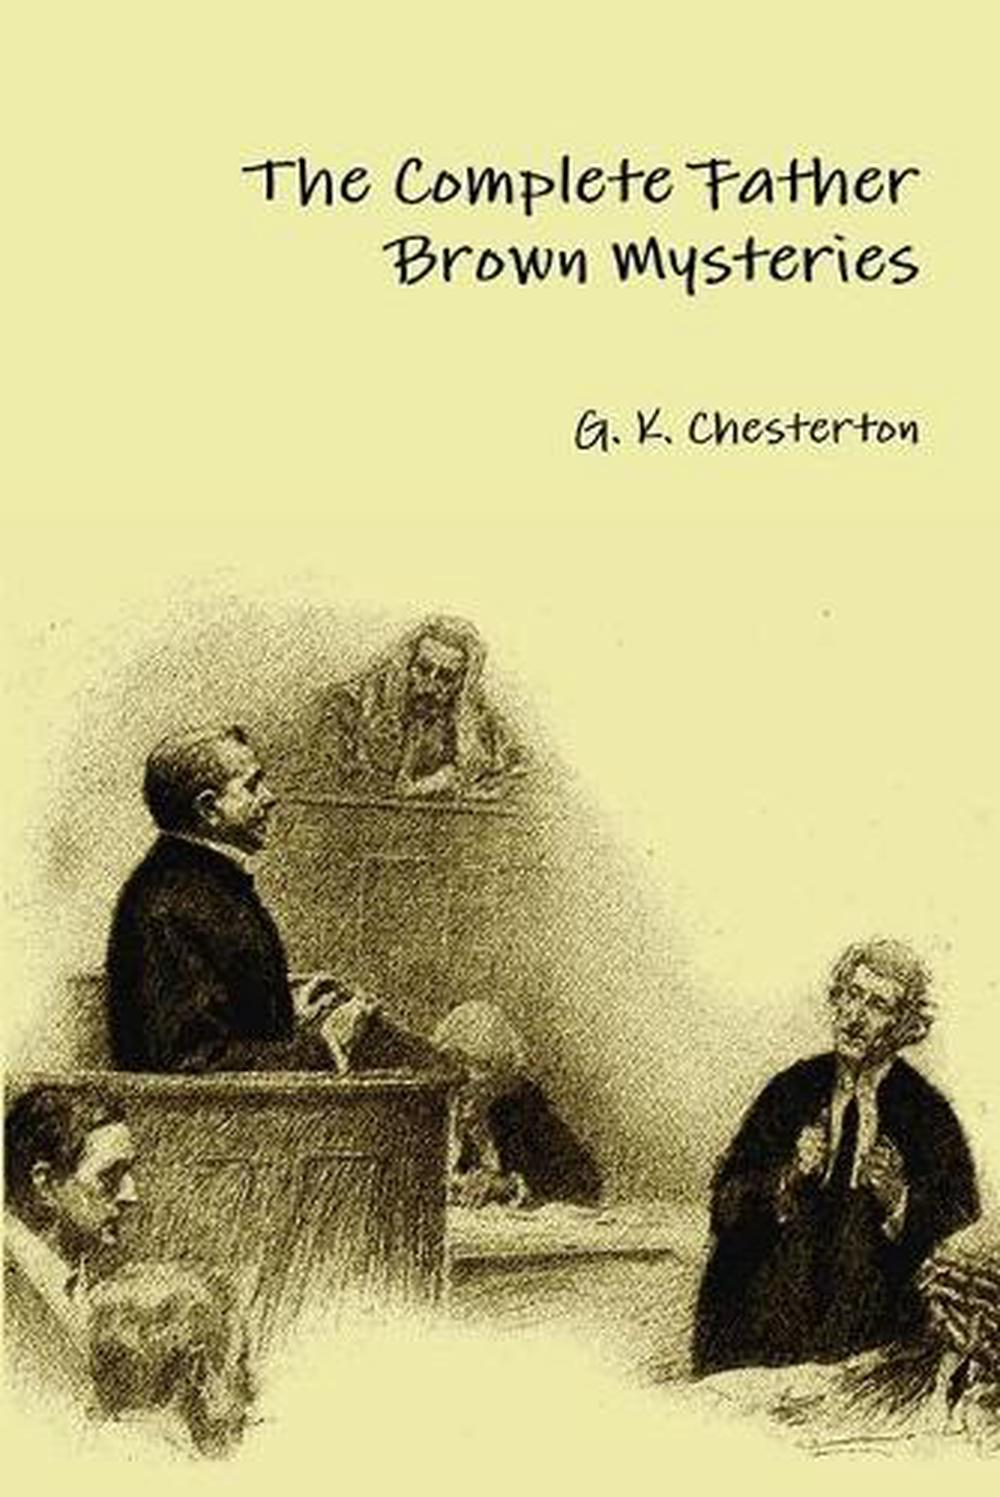 The Complete Father Brown Mysteries by G.K. Chesterton (English ...